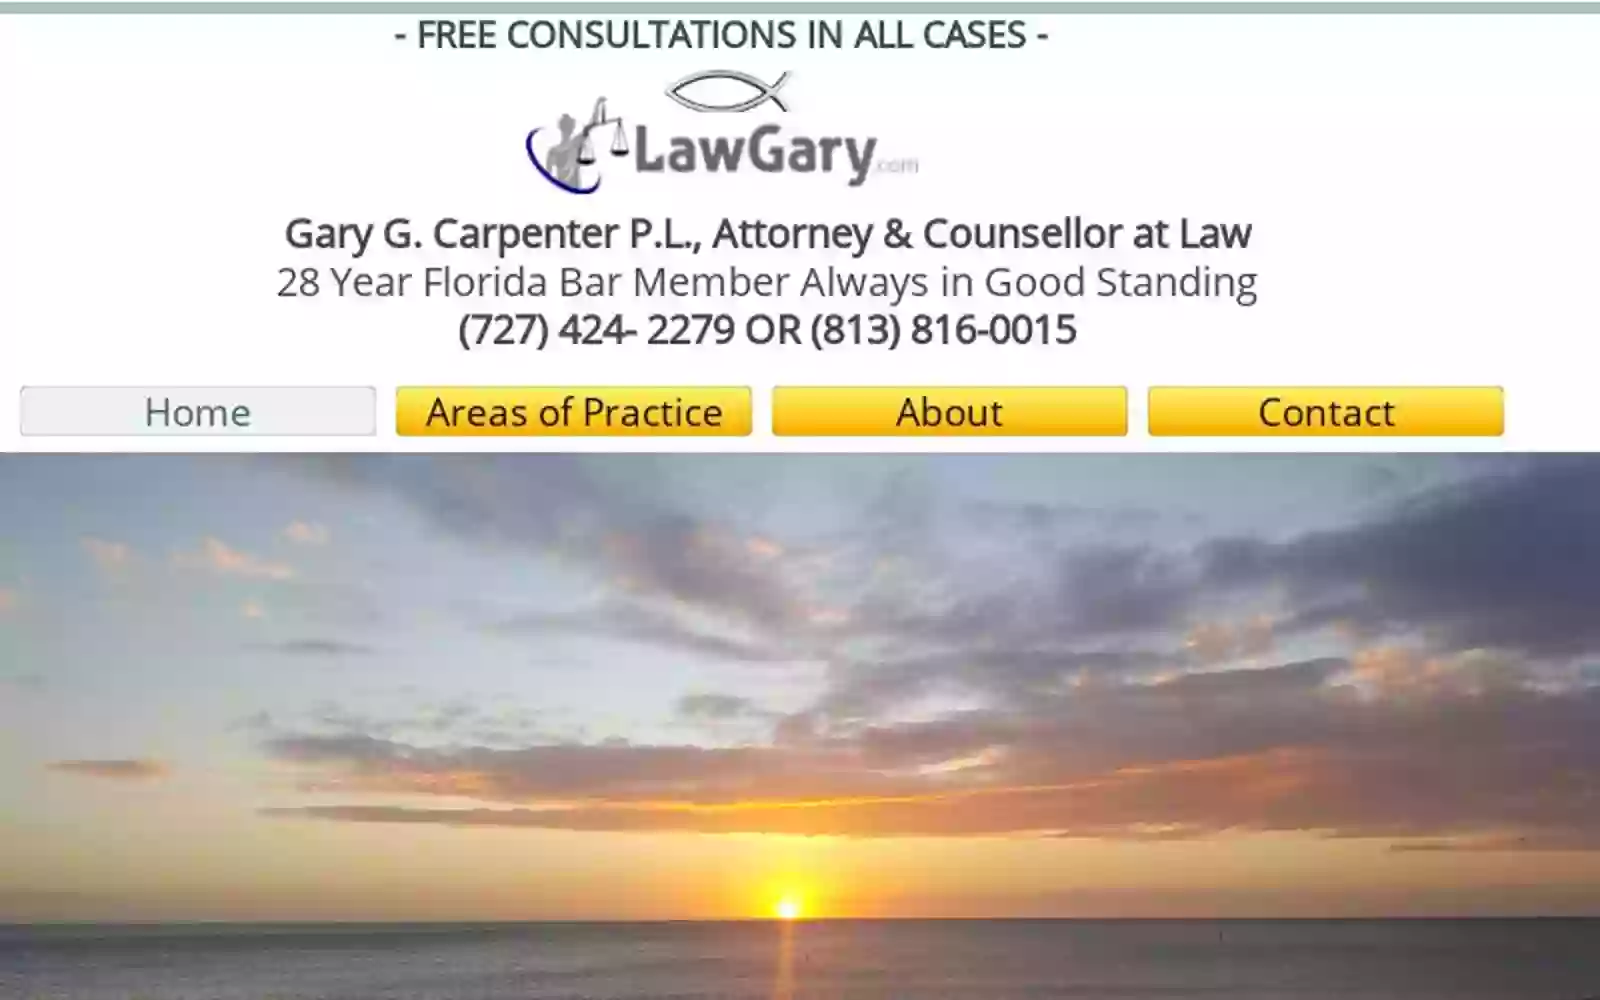 The Law Office of Gary G. Carpenter